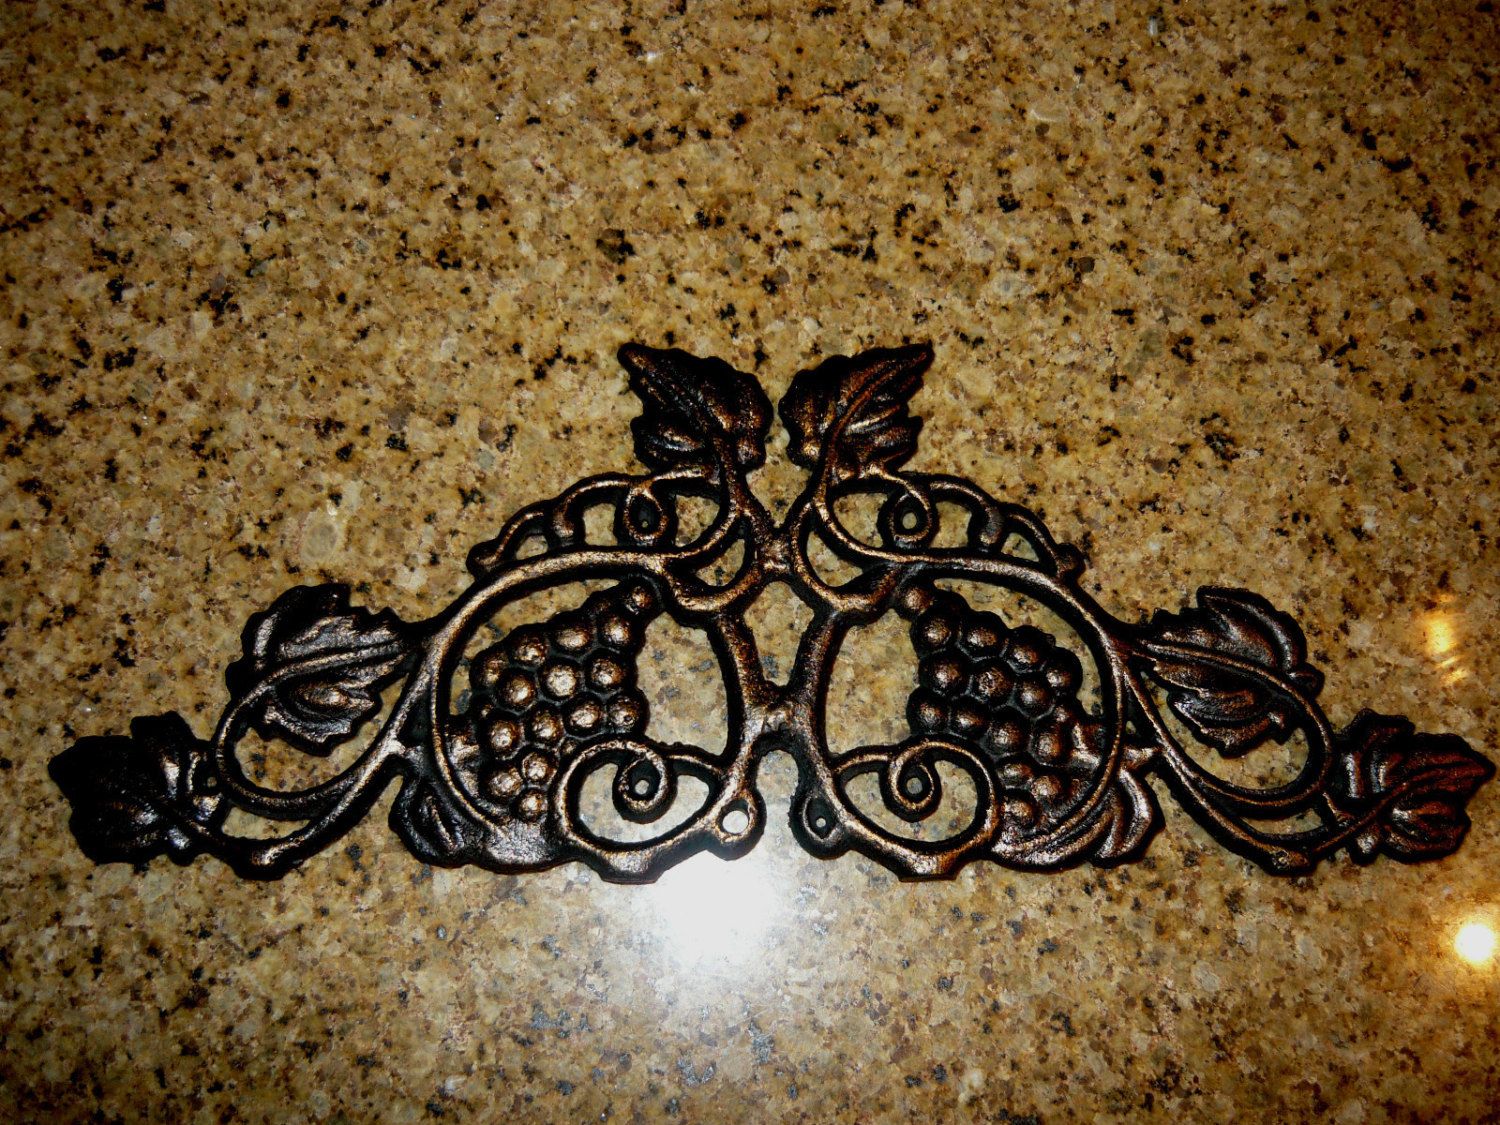 13 Inches Cast Iron Grapevine Topper Wall Plaque Valance Old World Regarding Brass Iron Wall Art (View 14 of 15)